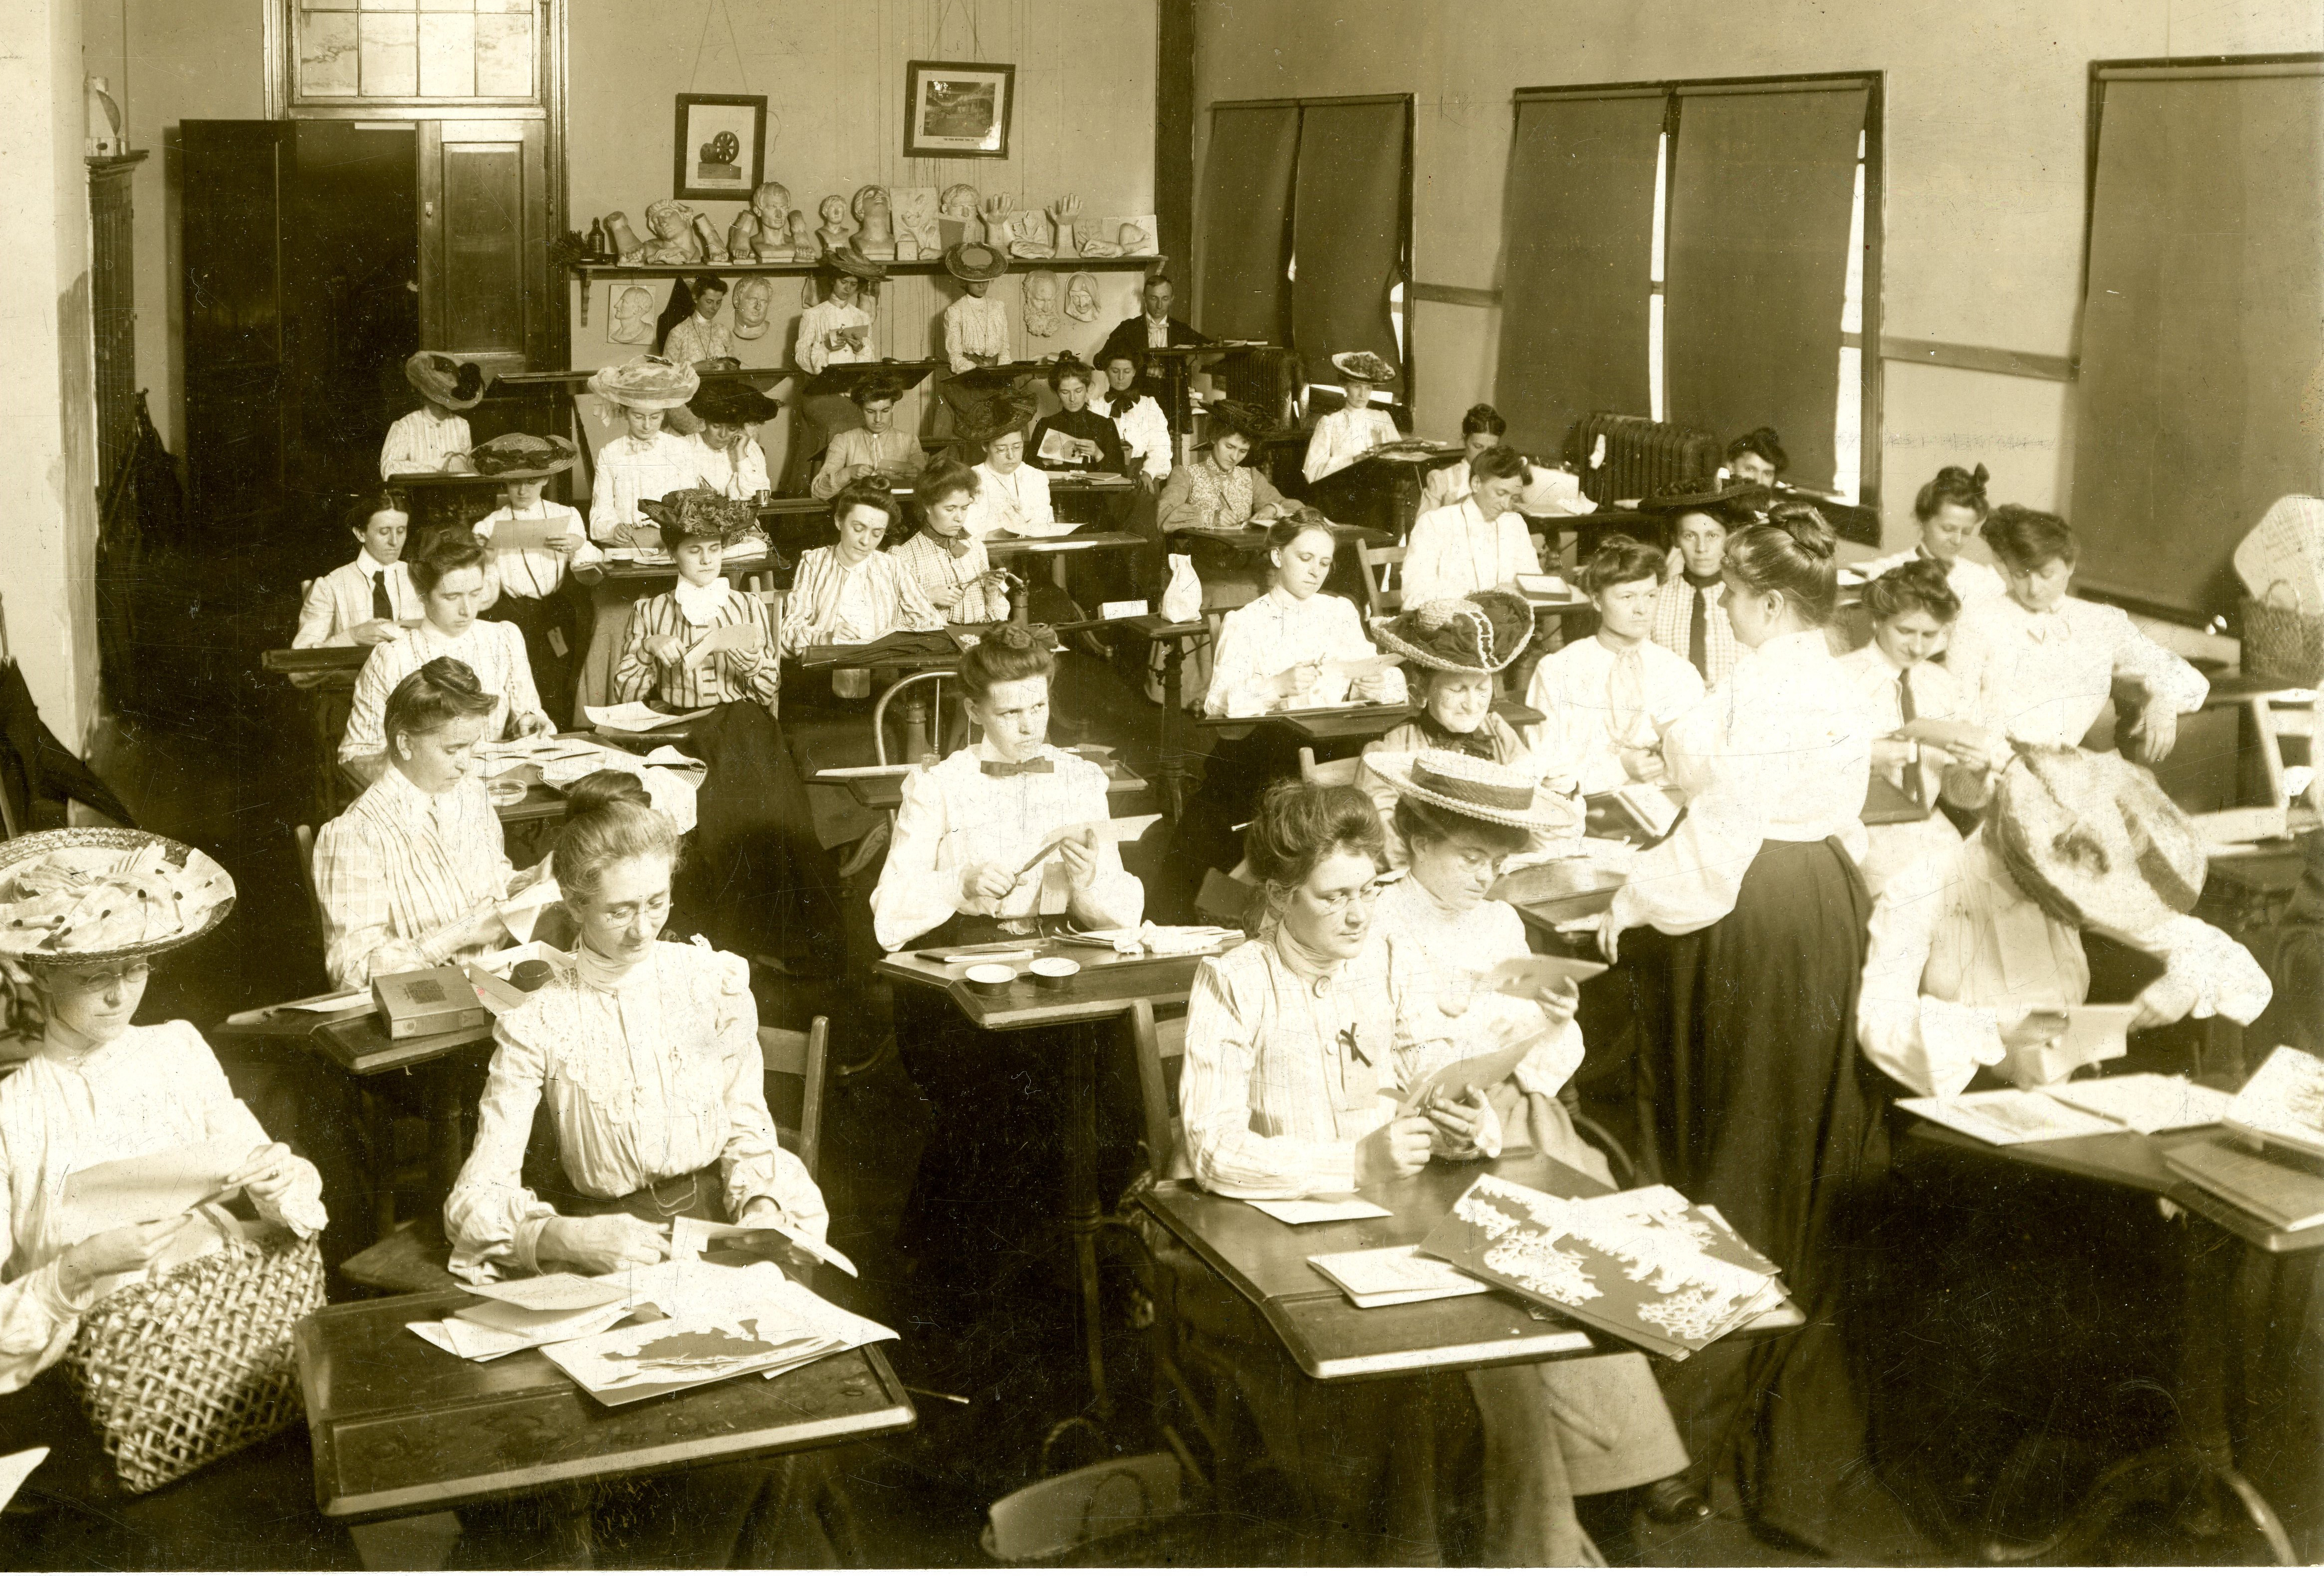 Black-and-white image of female students in the early 1900s during design class.